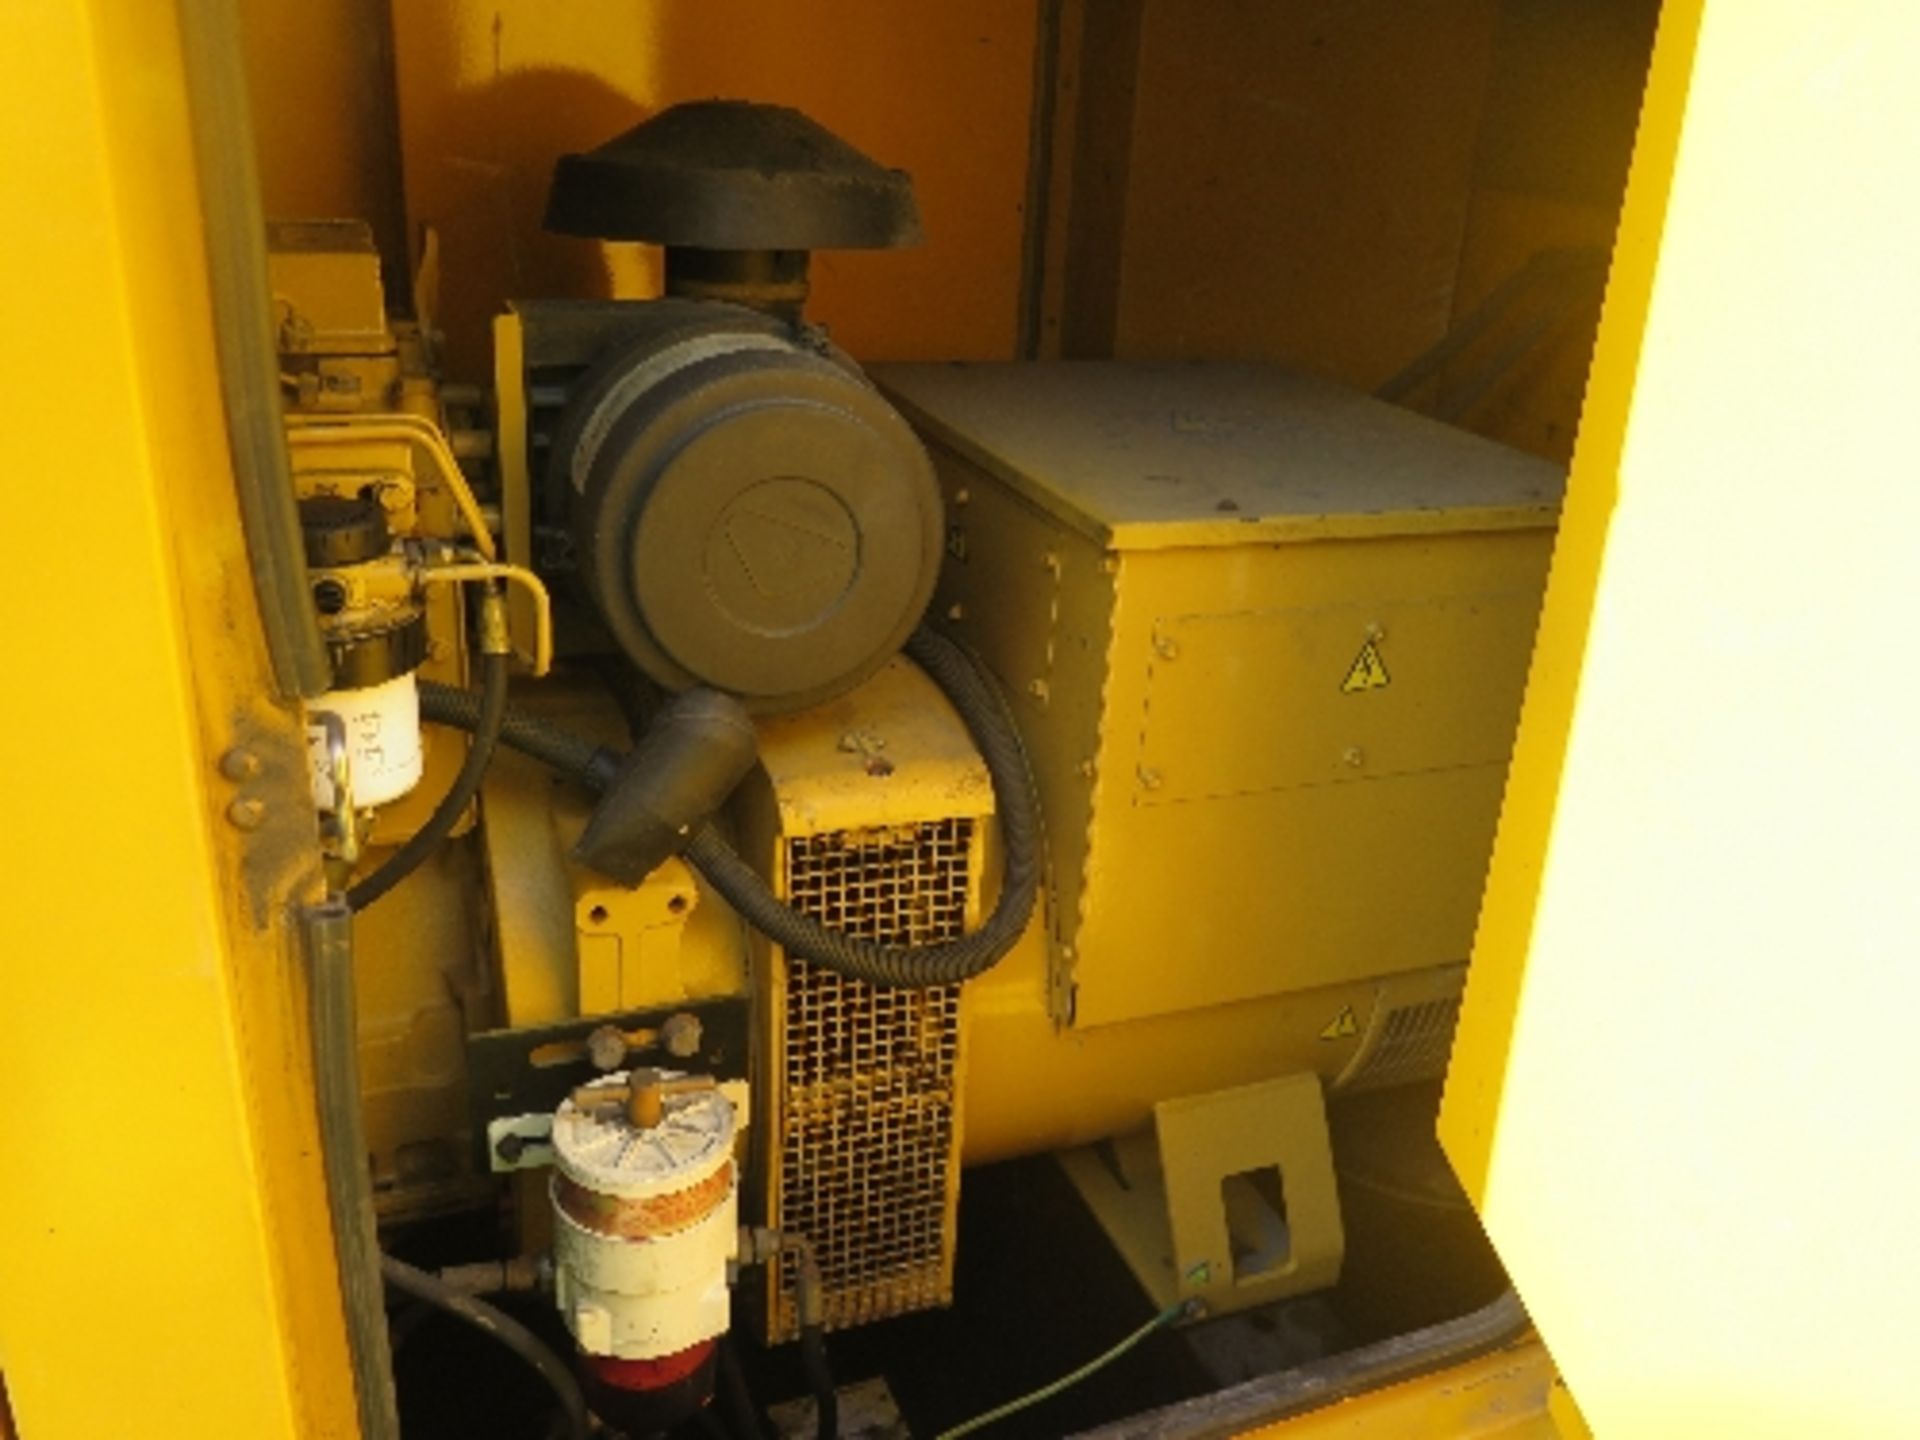 Caterpillar XQE100 generator 16850 hrs 138842
PERKINS POWER - RUNS AND MAKES POWER
ALL LOTS are - Image 4 of 6